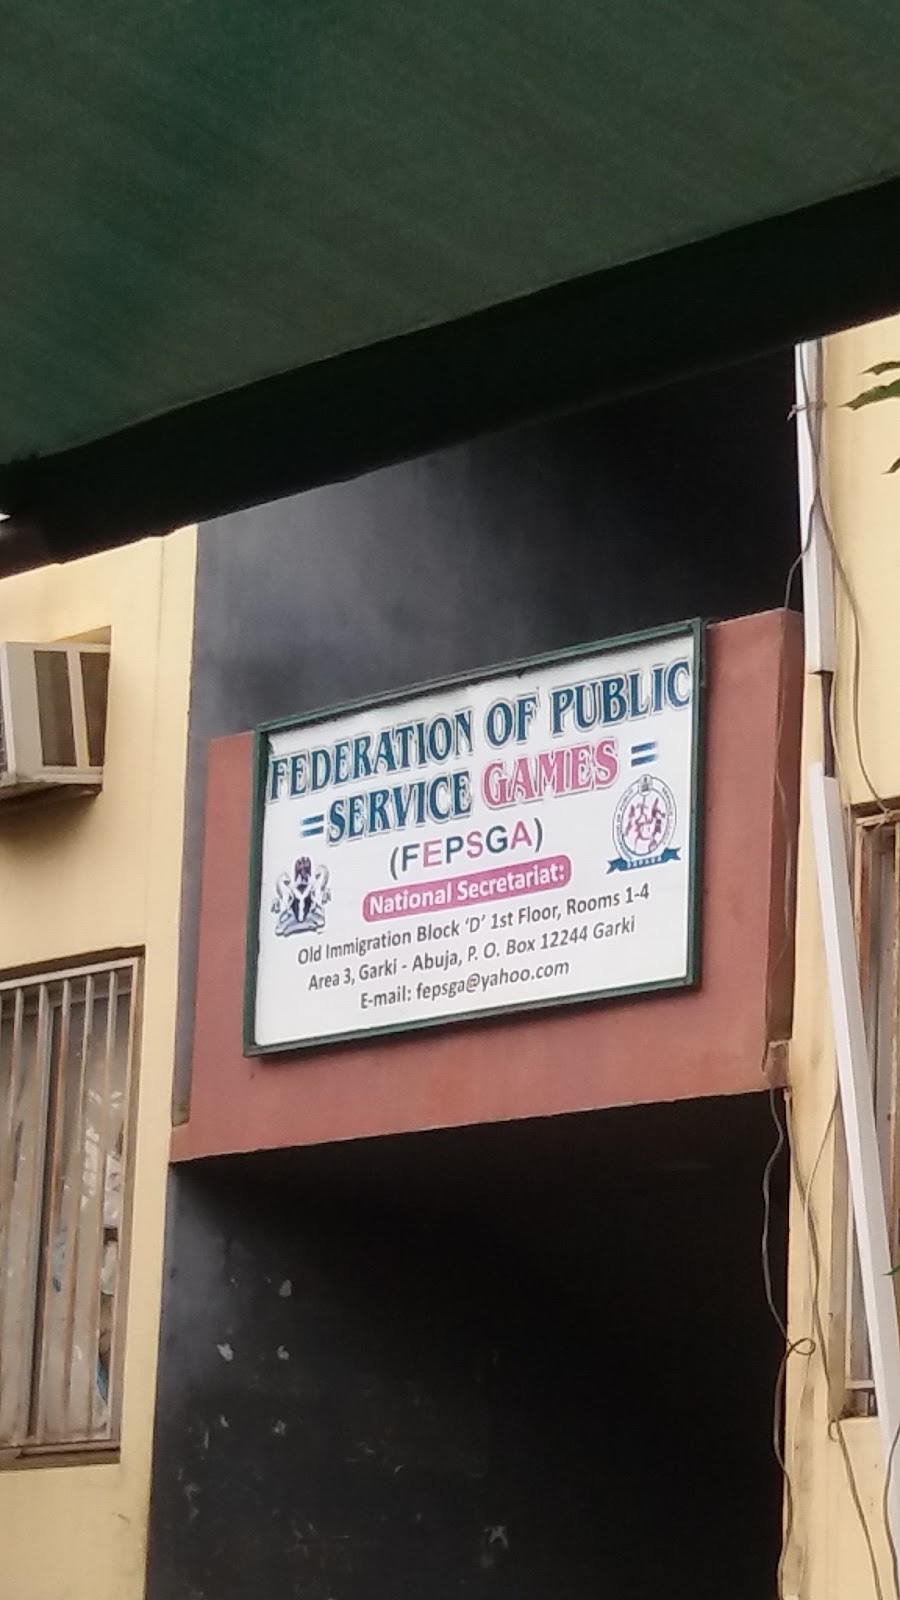 Federation of Public Service Games